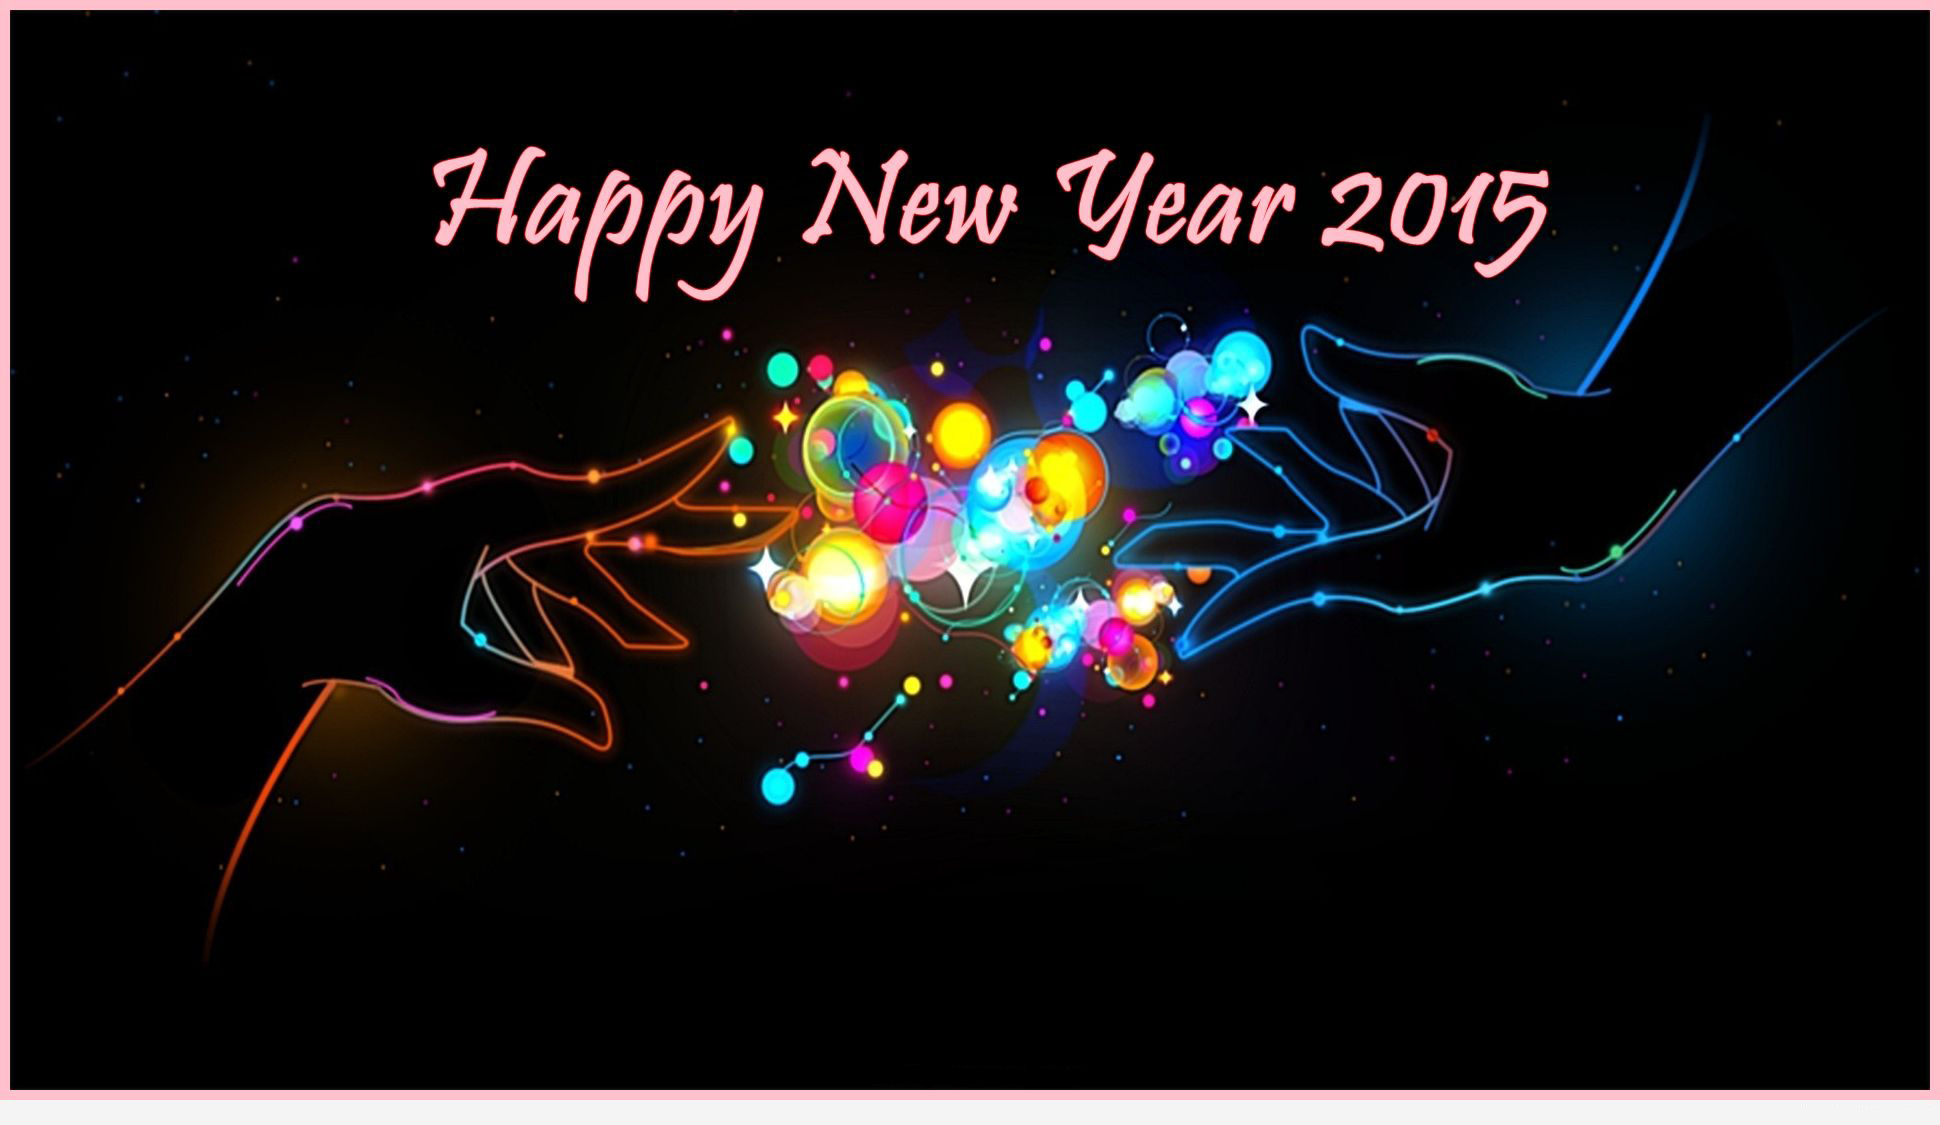 happy new year 2015 hd wallpapers 1080p - Free hd wallpapers